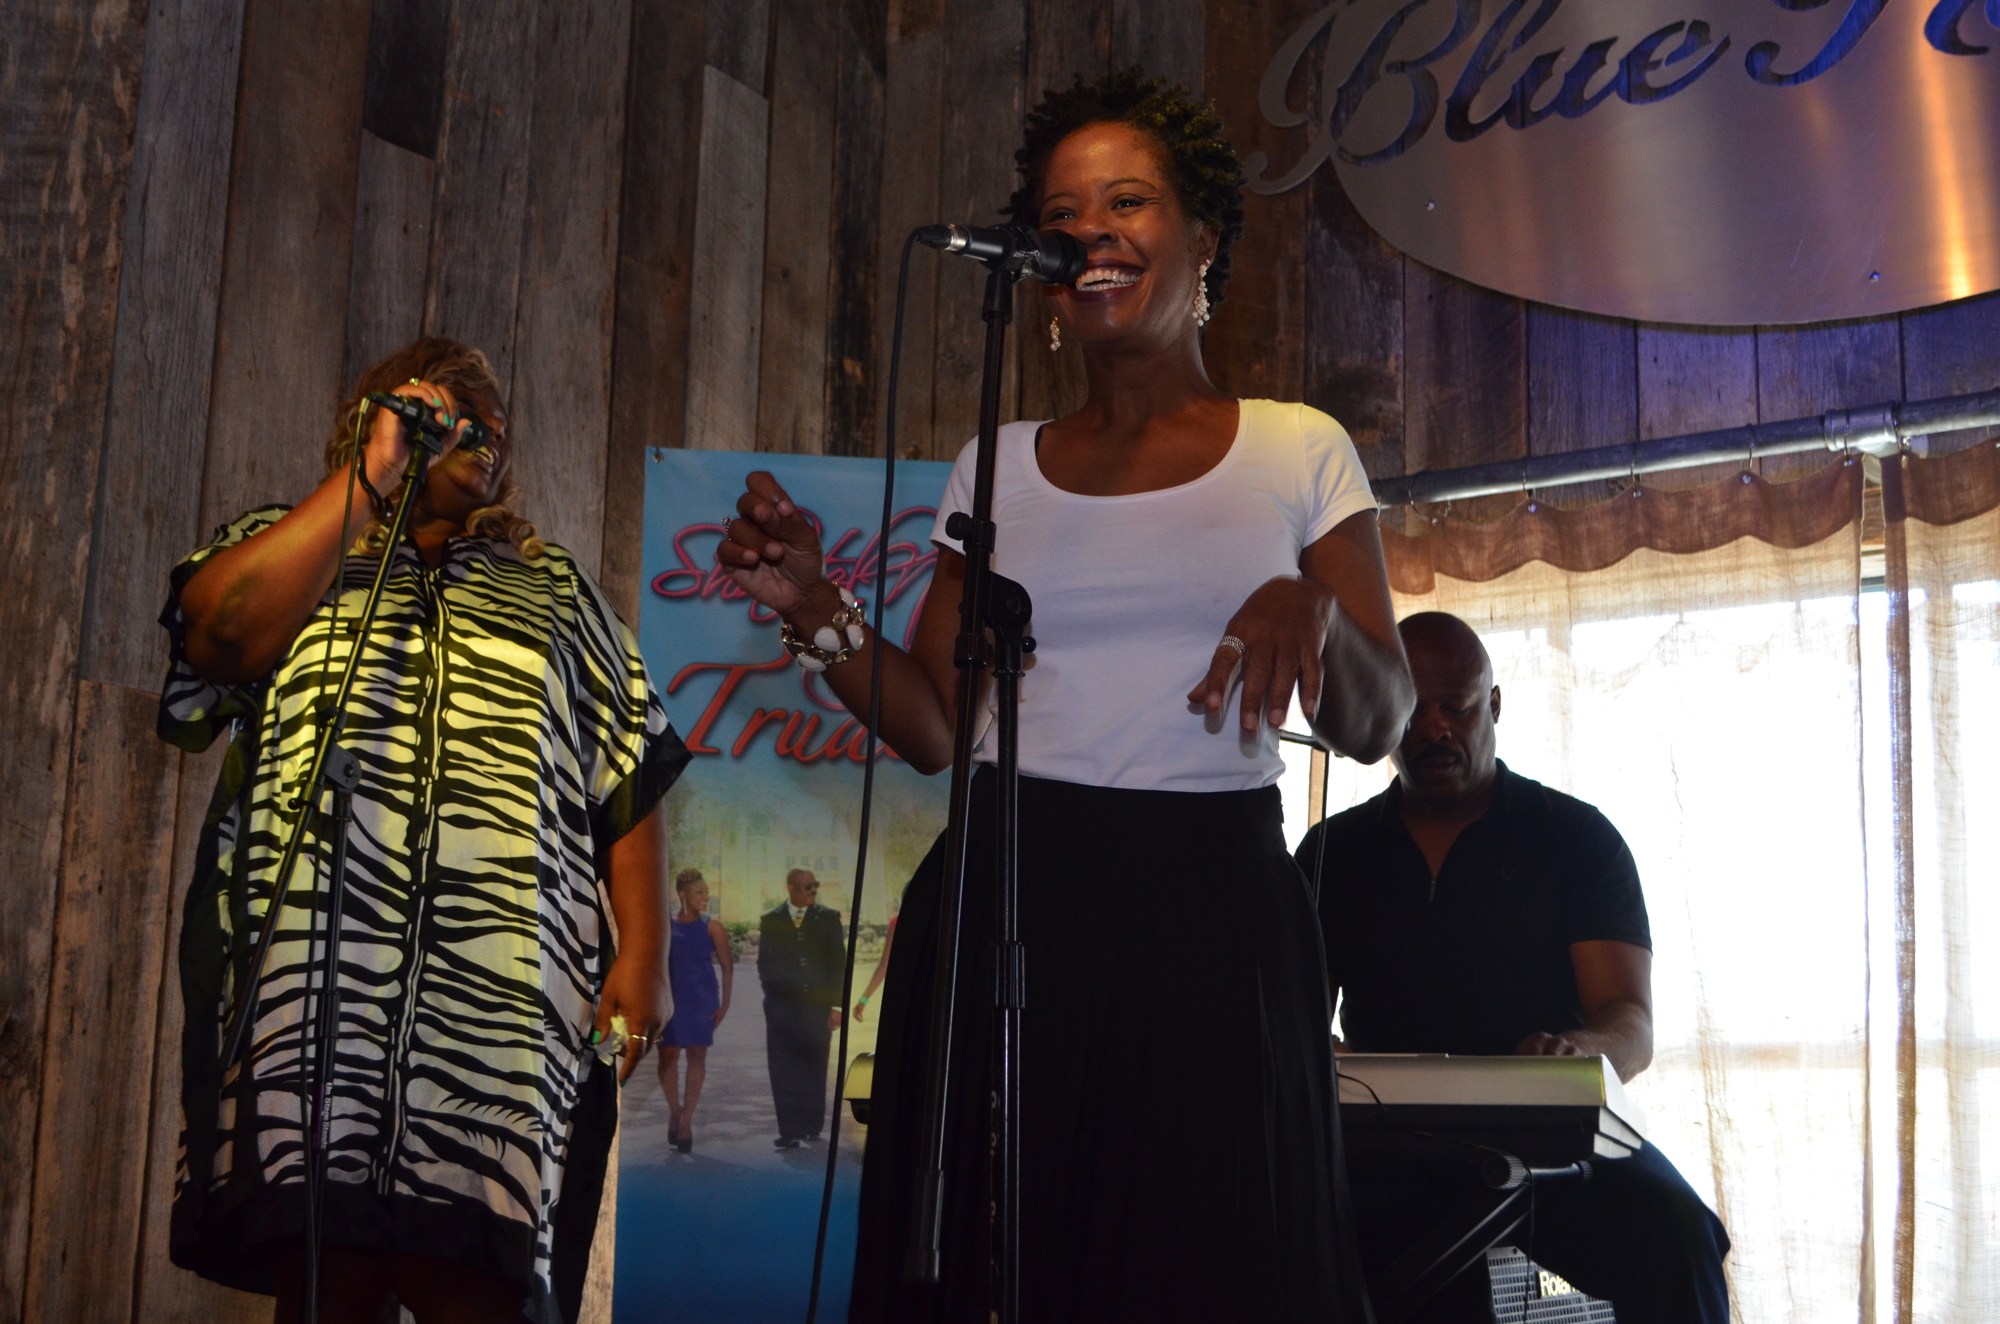 Alto Joycelyn Corbert smiles as she sings with tenor Kimla Murrell and music director Dennis Clove plays piano. The vocalists often incorporate choreographed dance moves into their performances. Photo by Niki Kottmann.